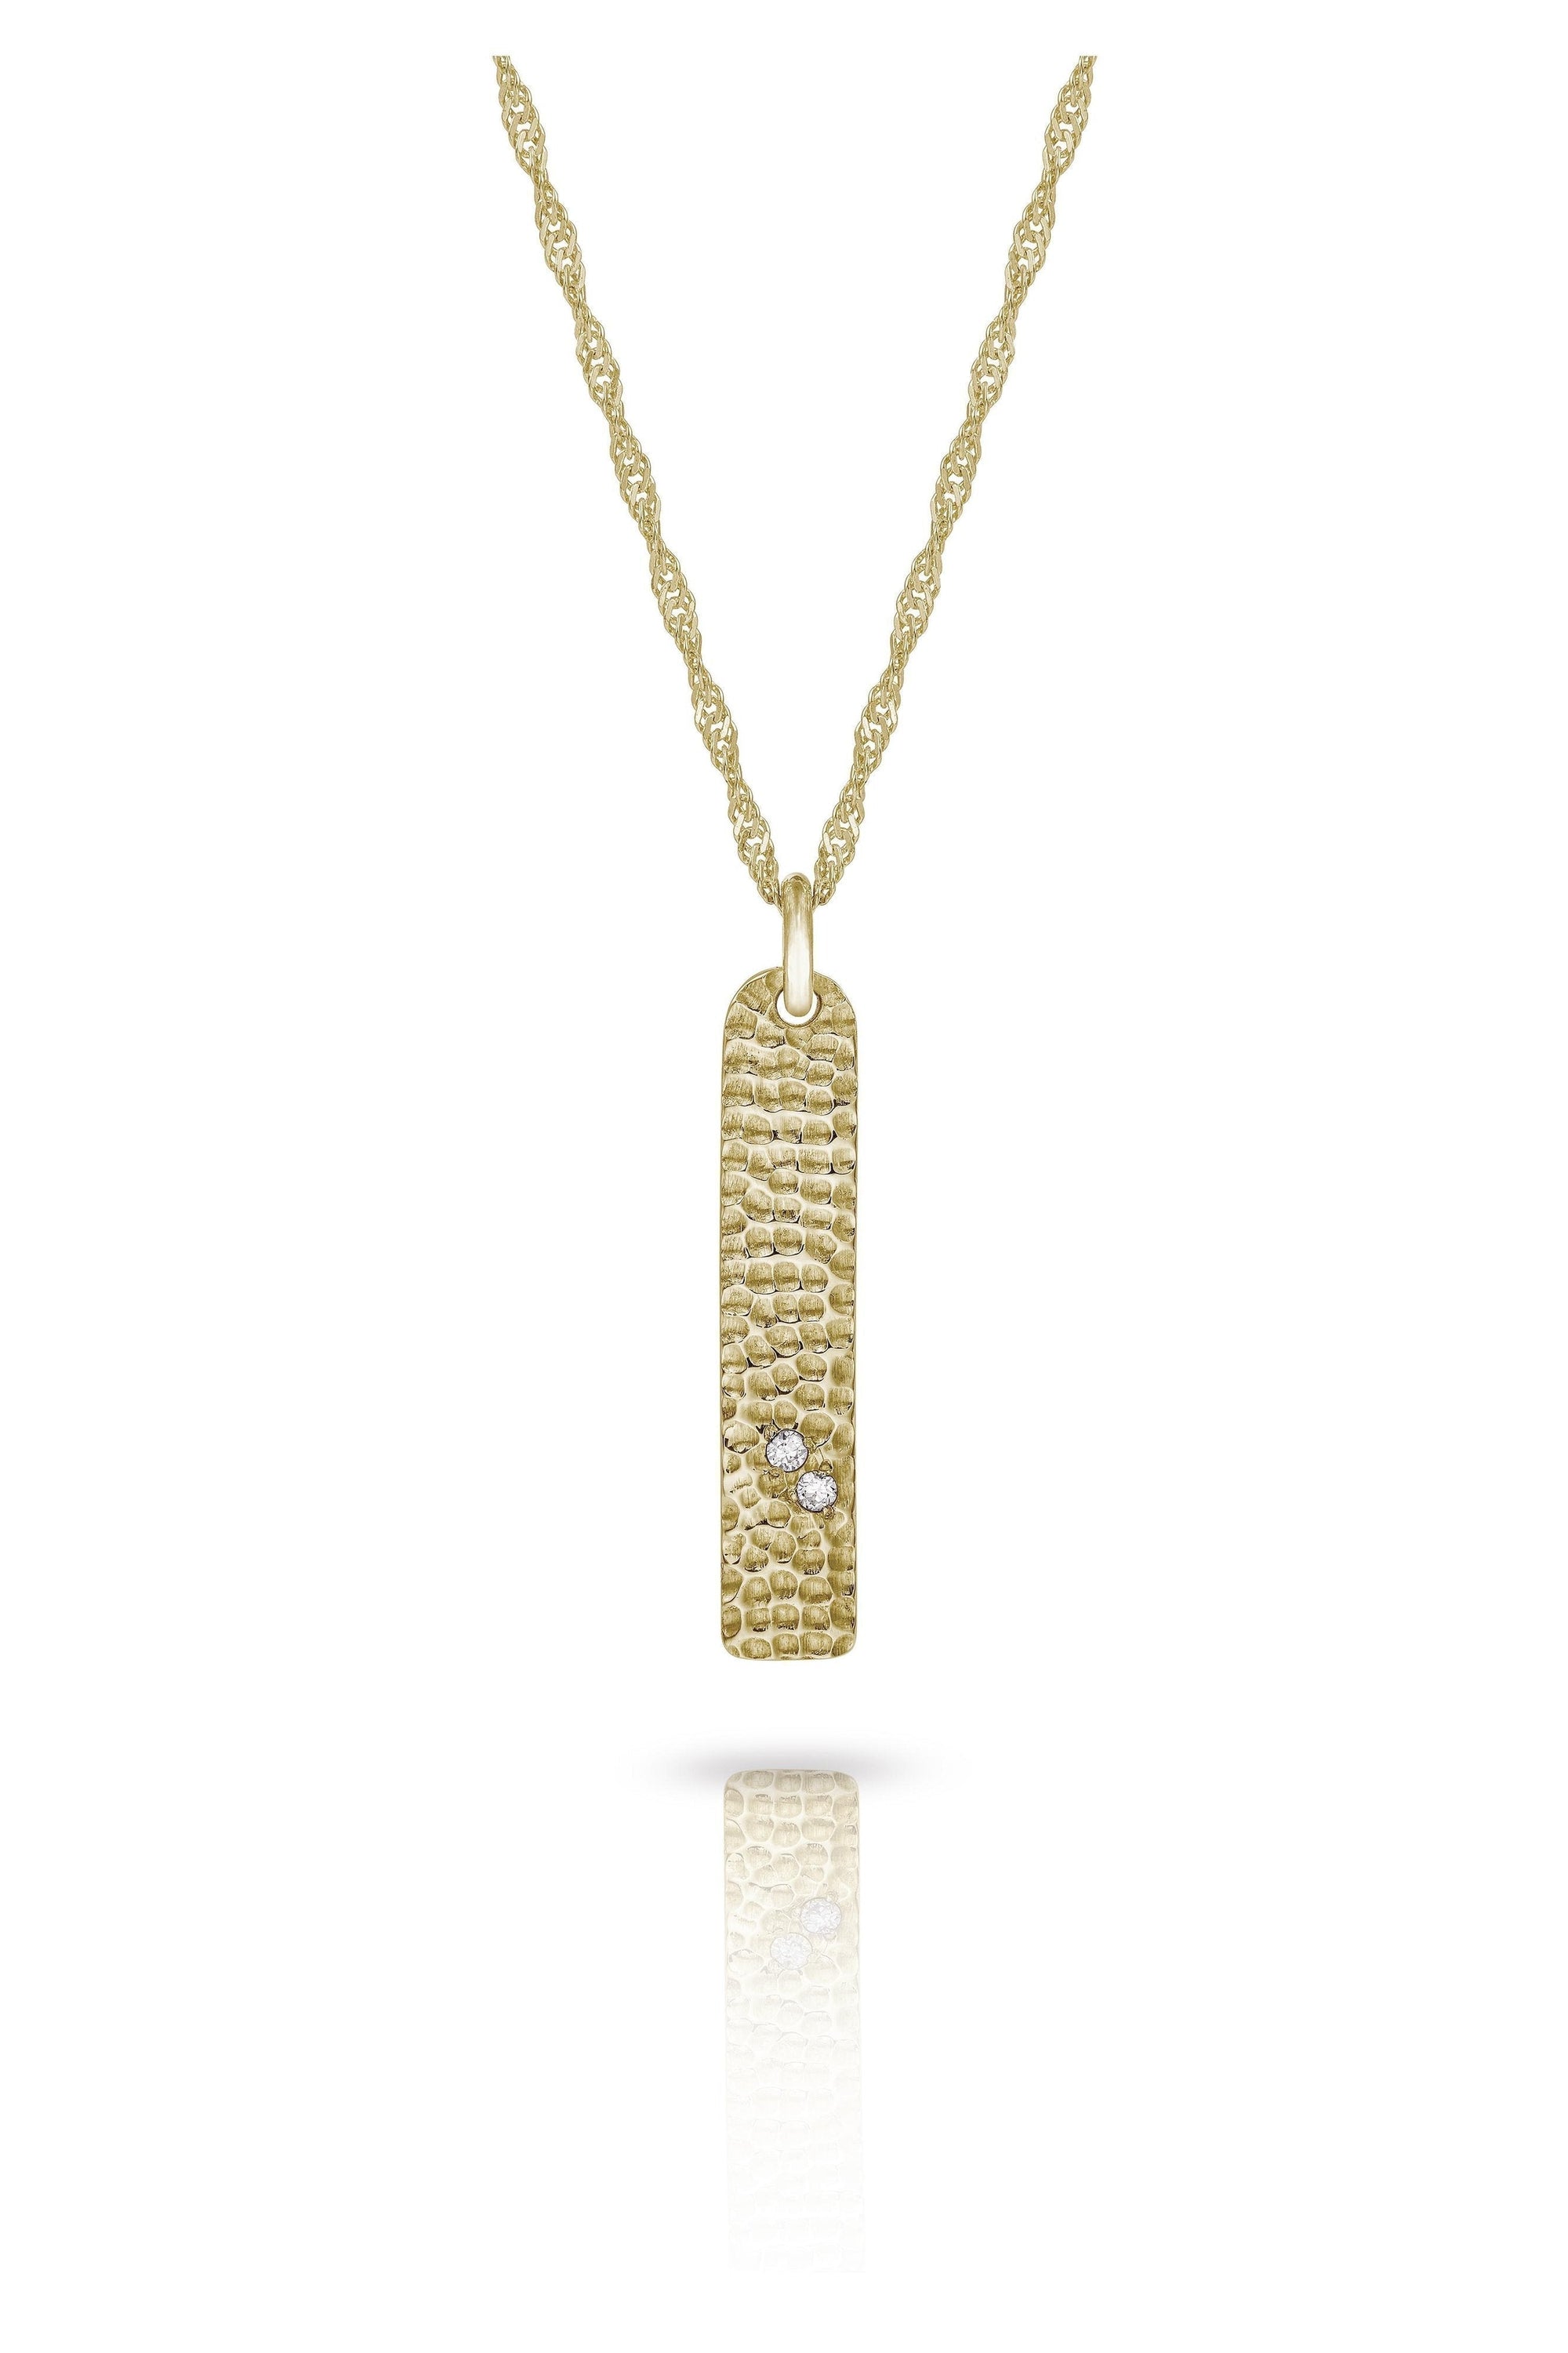 9 carat Gold Luxury Dog Tag Necklace with Diamonds-The Diamond Setter